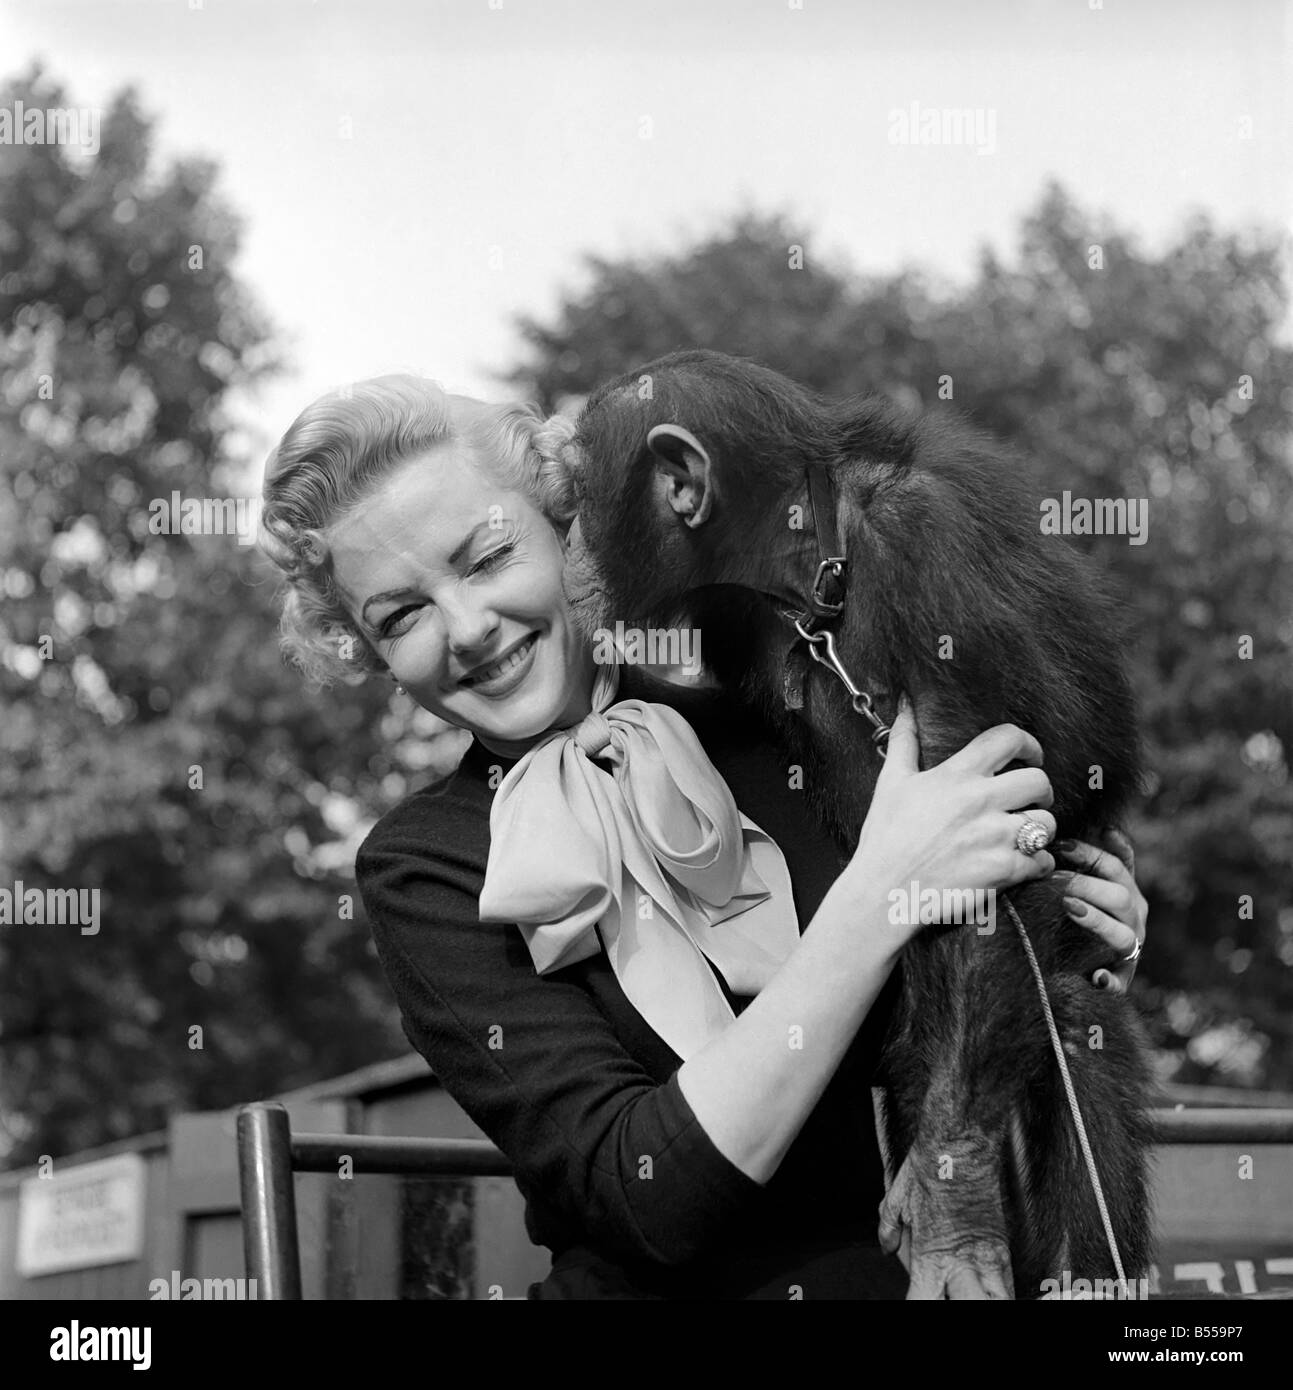 Animals: Monkeys. Miss Vivian Blaine of Guys and Dolls made a special visit to the London Zoo to take American apple pie to the Stock Photo